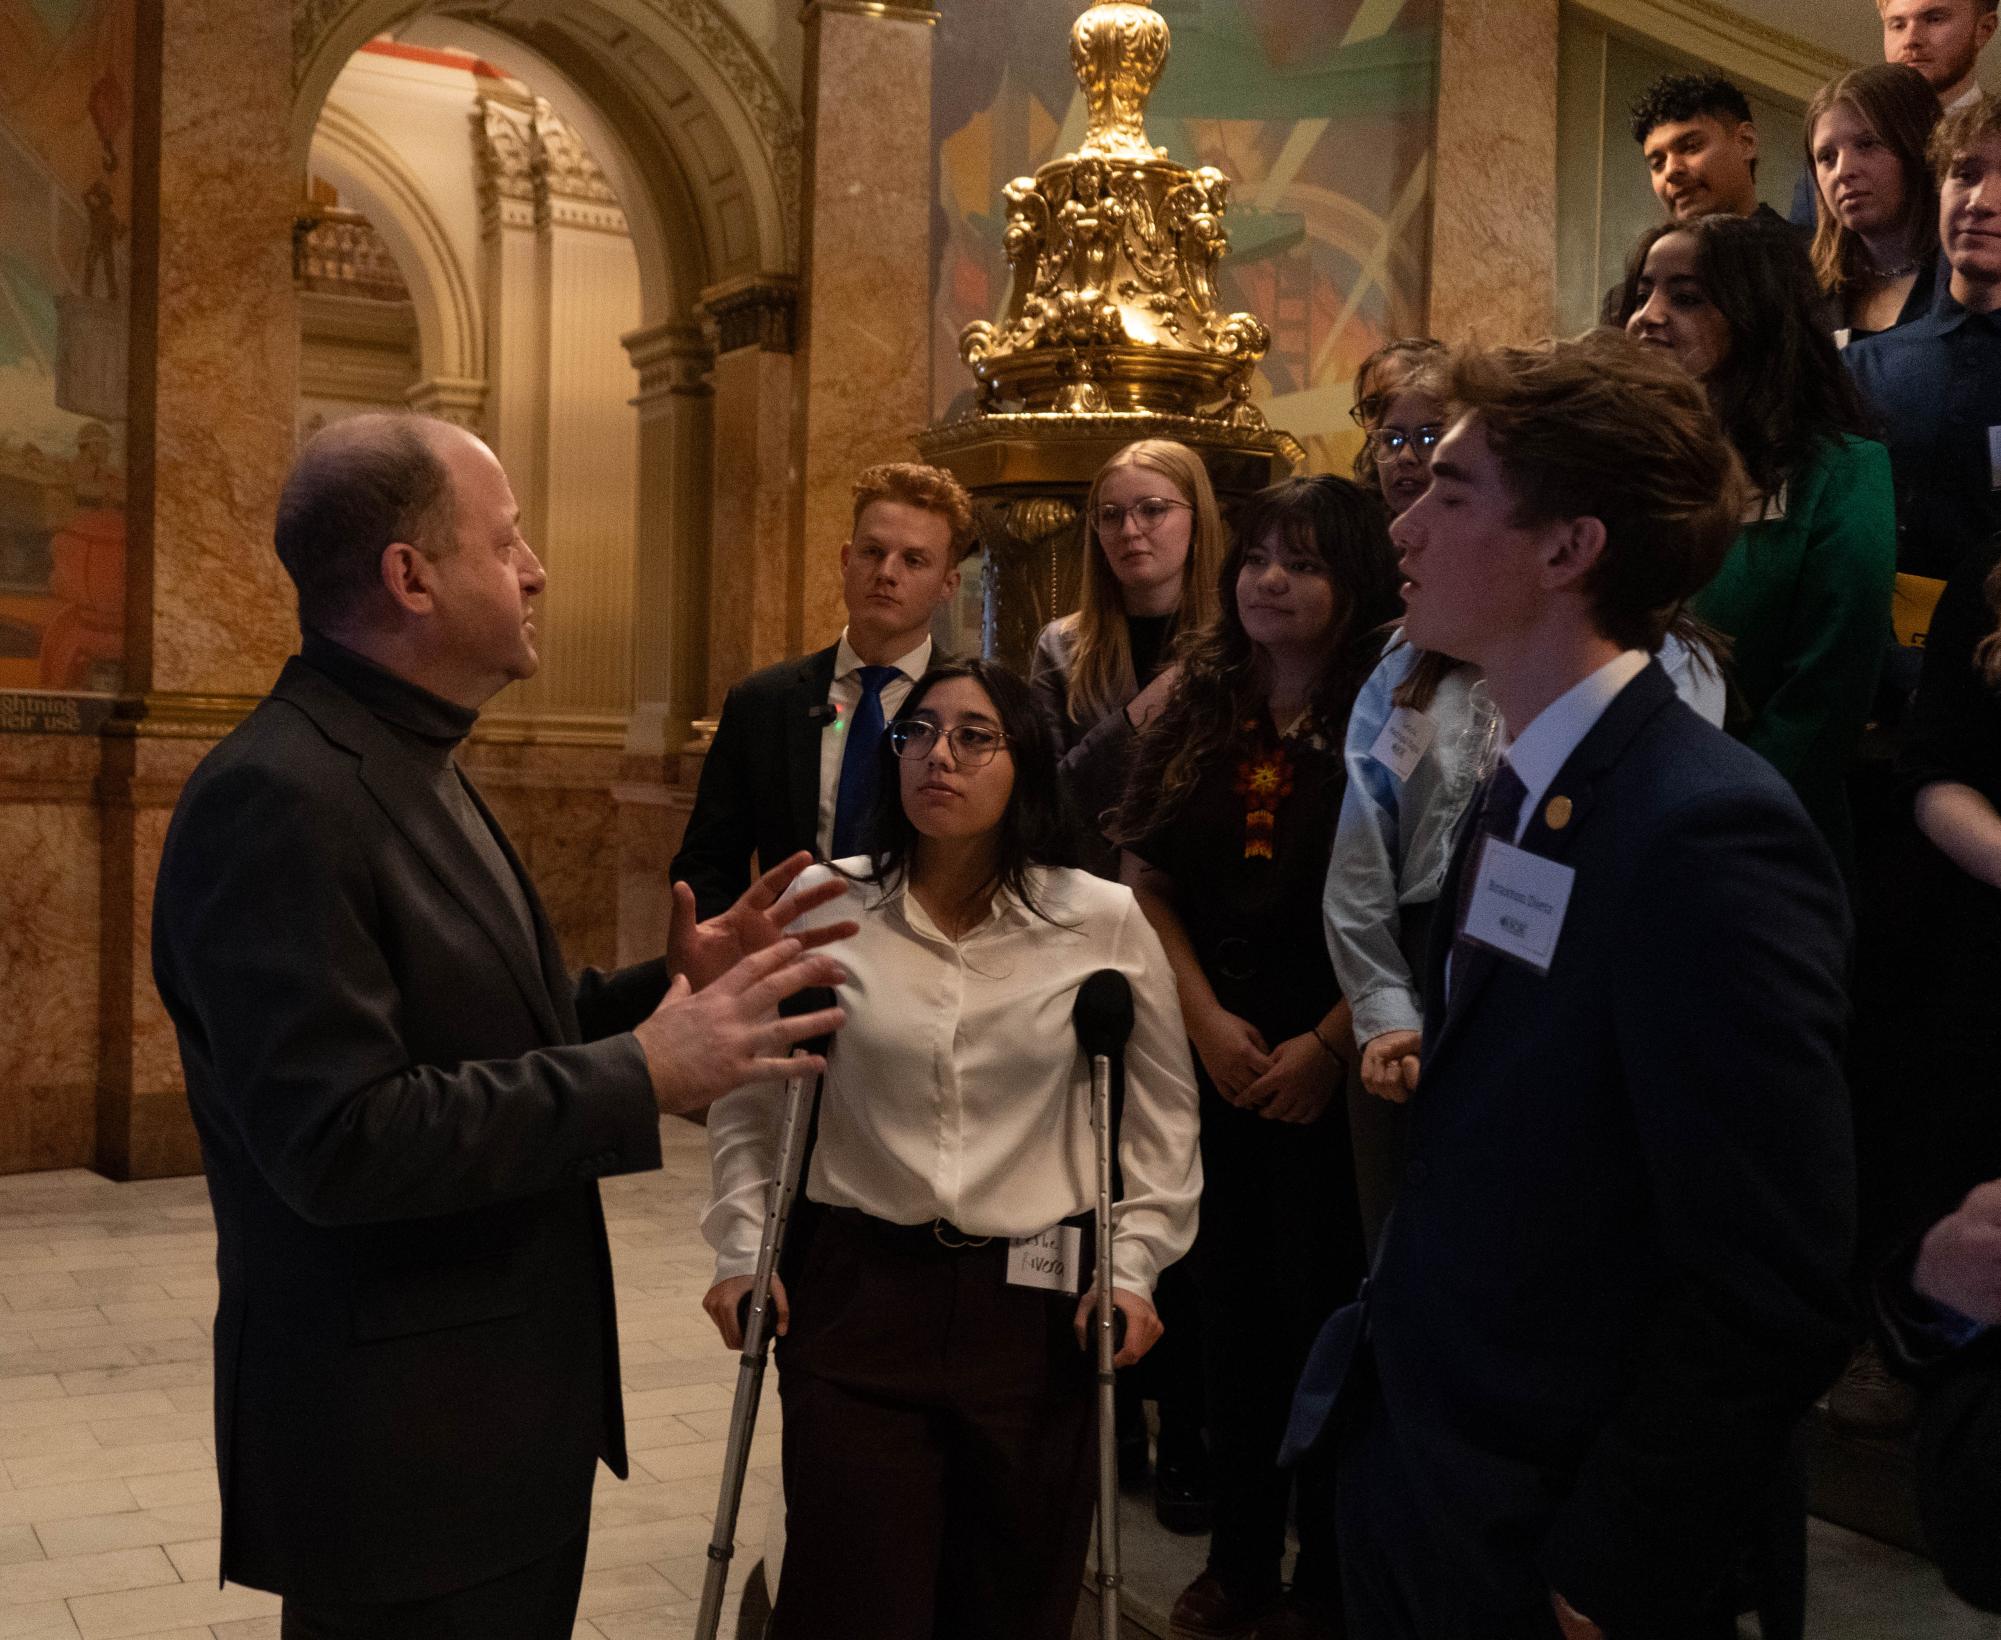 CSU+students+visit+Colorado+Capitol%2C+engage+with+government+officials